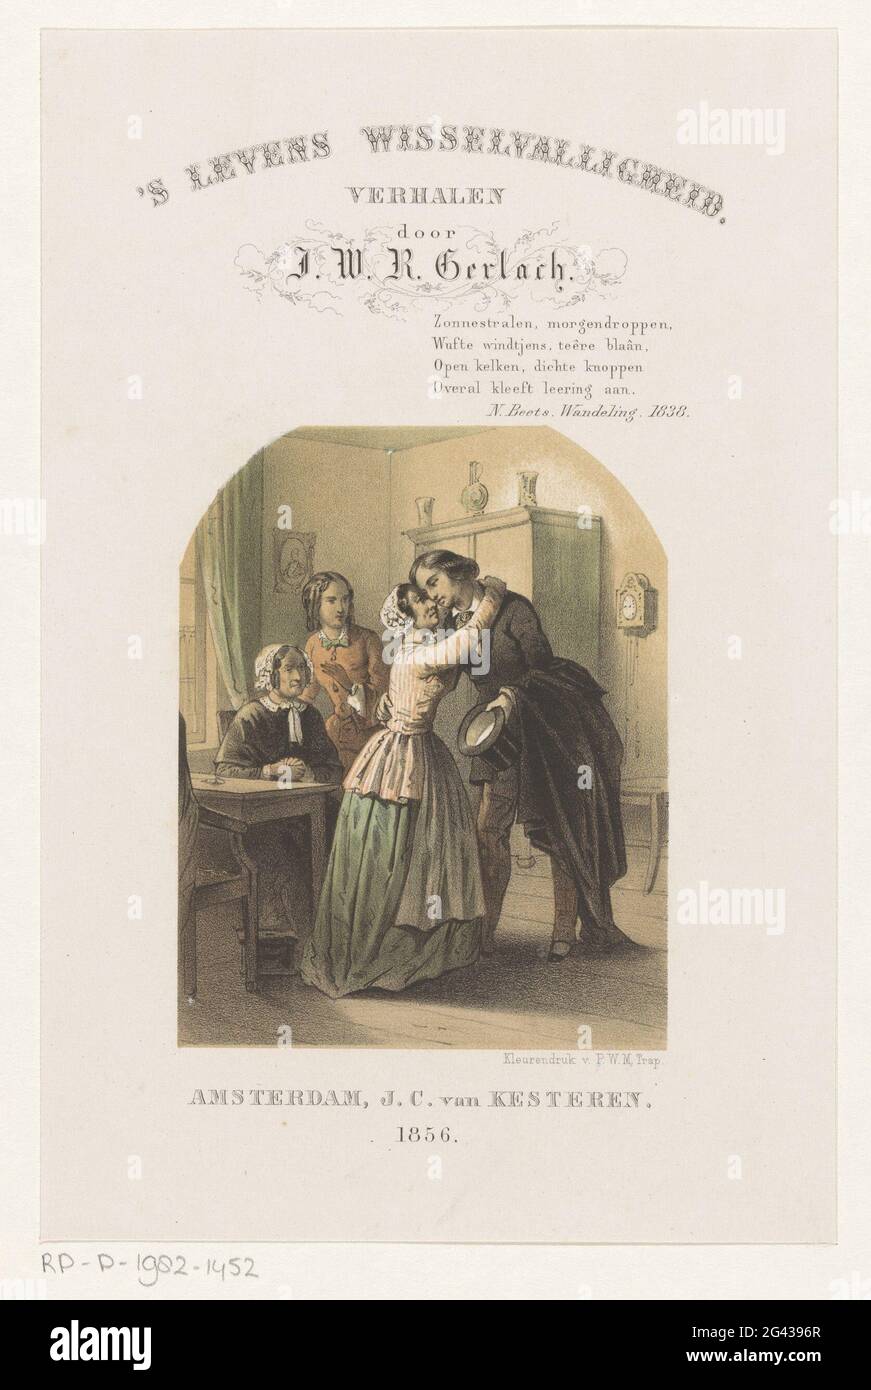 Embracing woman and man; Title page for: j.w.r. Gerlach, 's lives of volatility, 1856. A man and older woman embrace each other. Left watch a sitting old woman and a young woman to the couple. Stock Photo